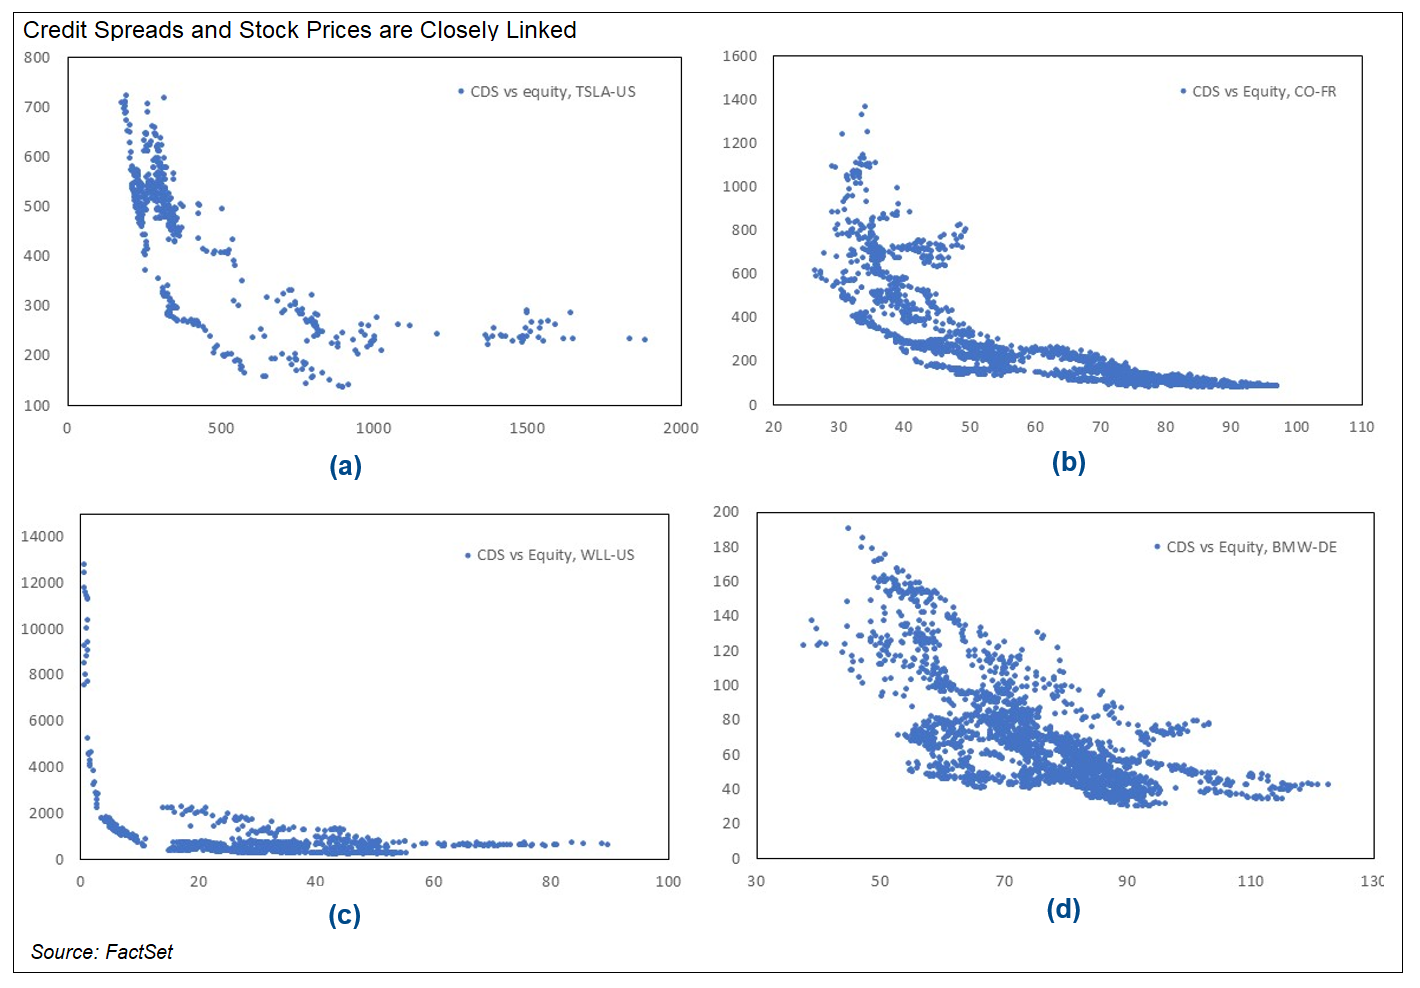 Credit Spreads and Stock Prices